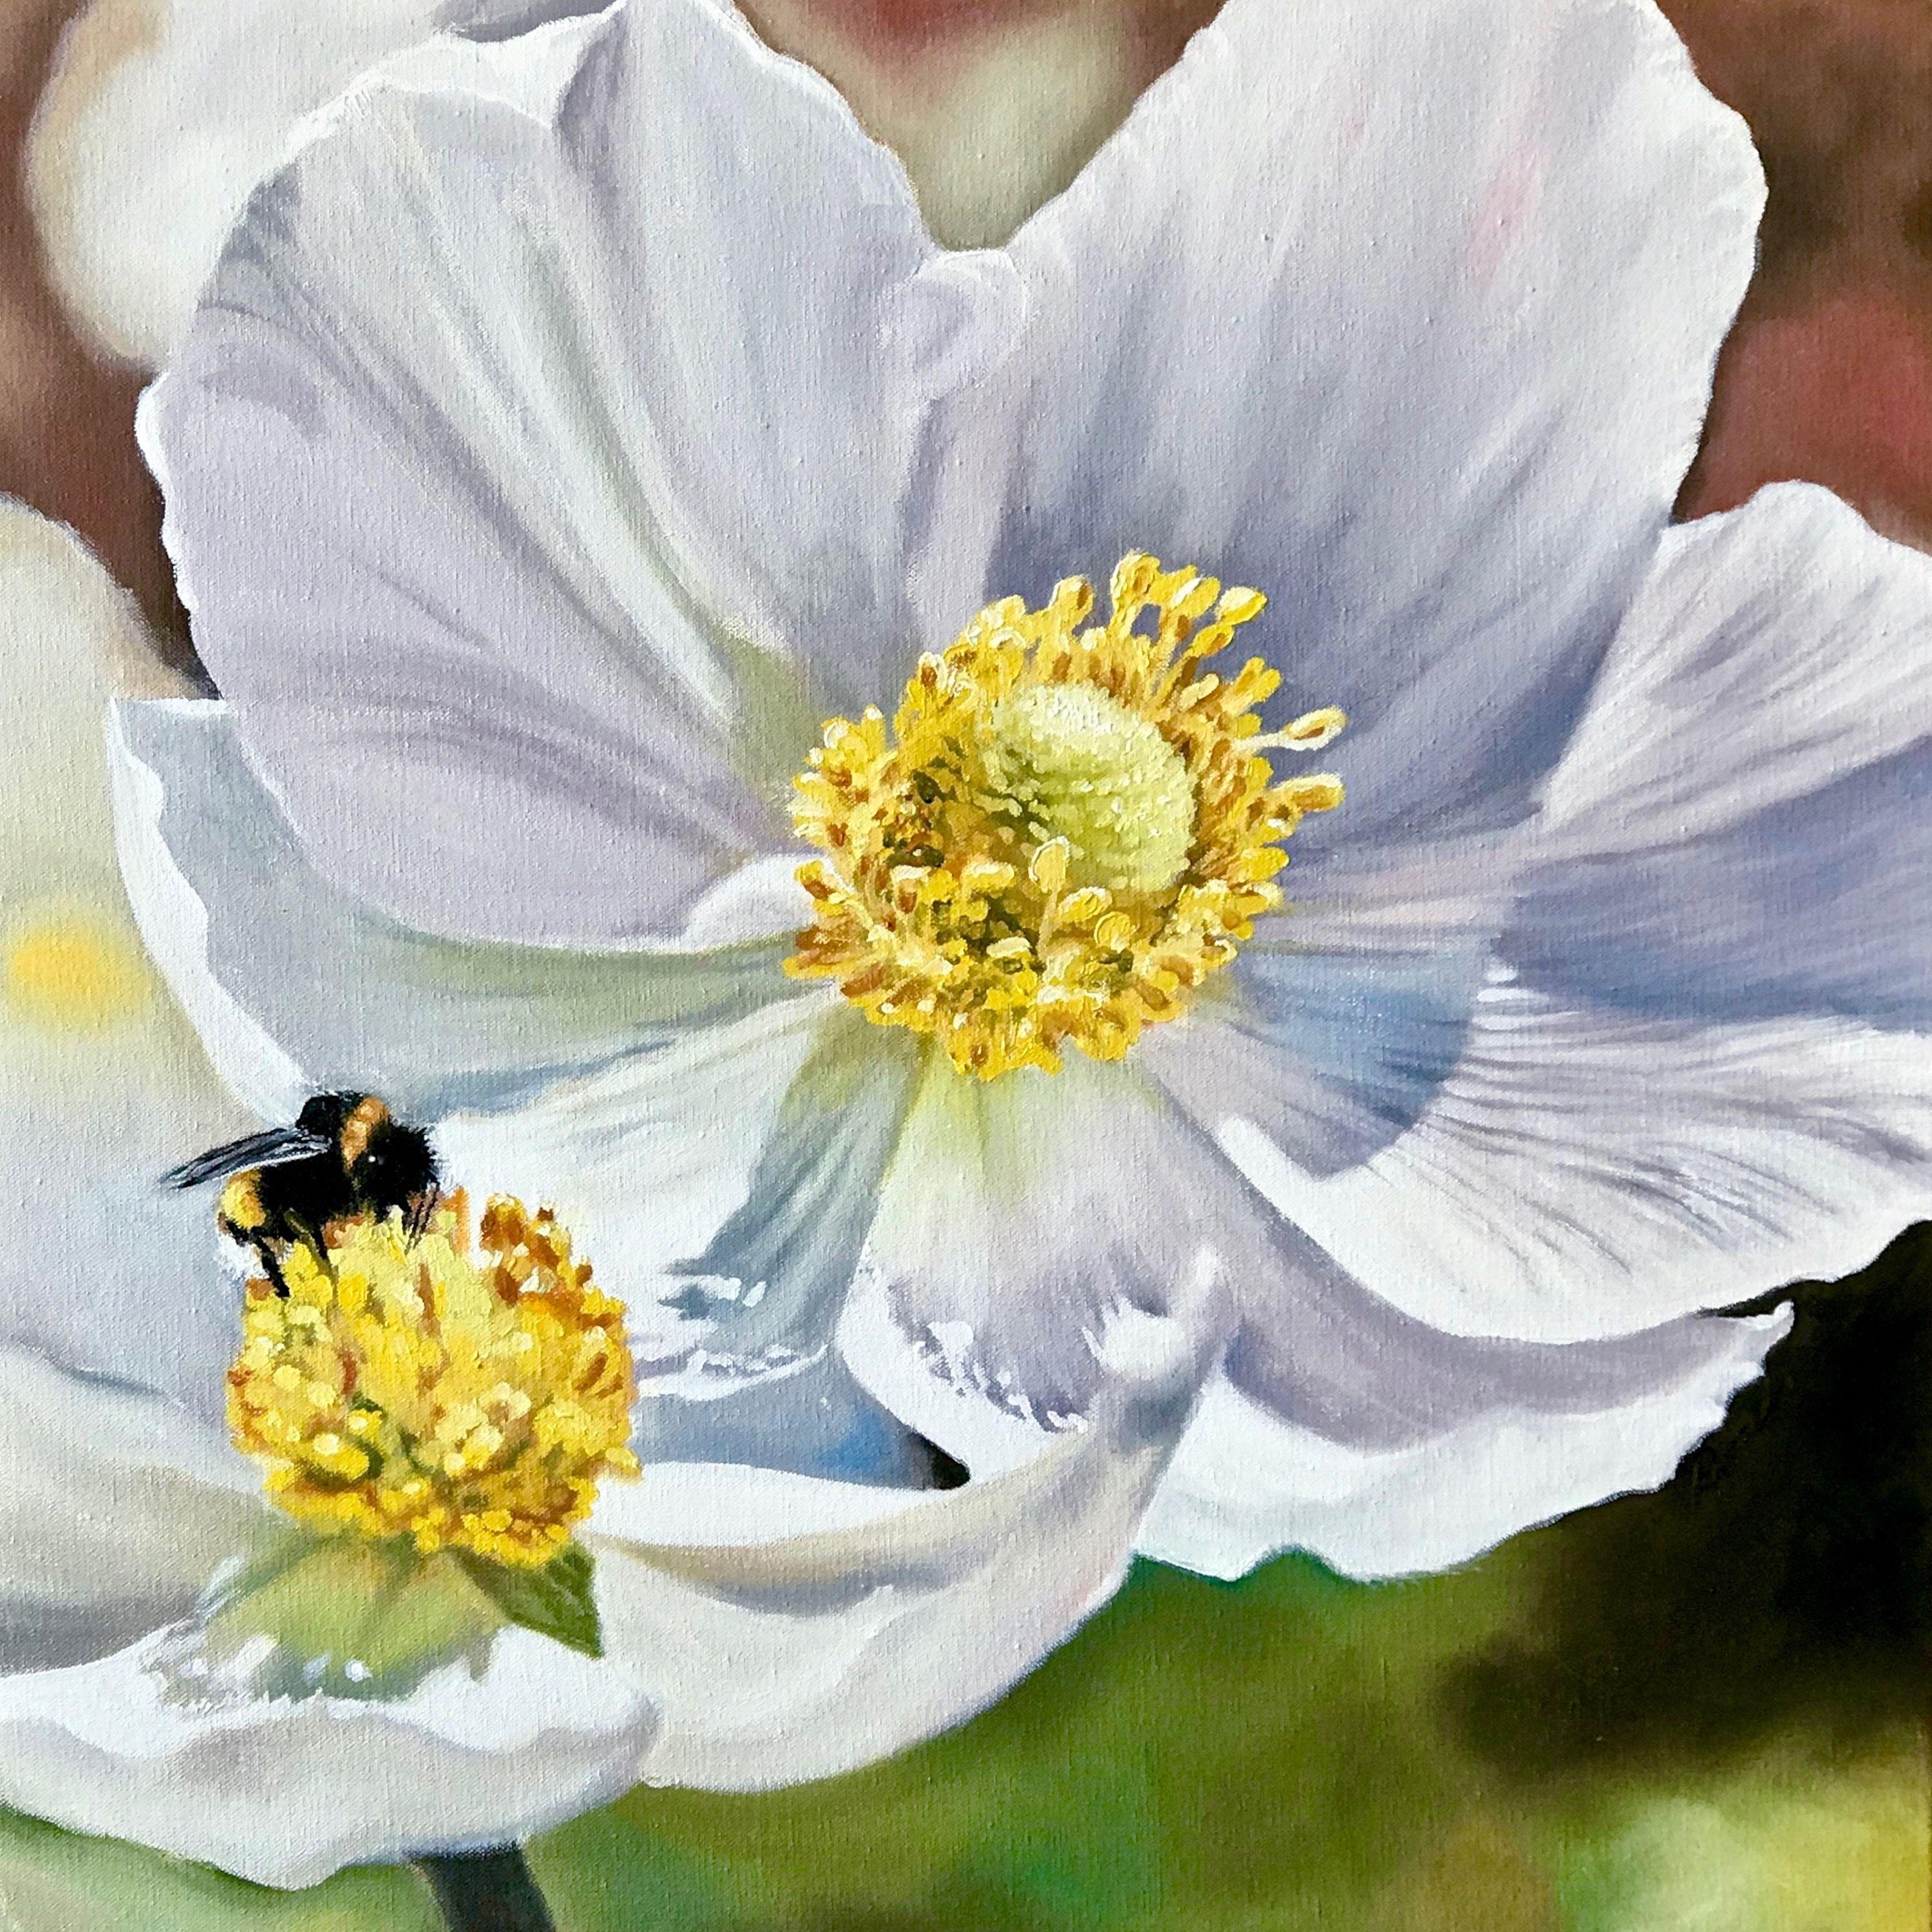 A bee pollinates  a field of white  Anemones. The bee's passionate urge to visit each flower, spread the seed, sip the nectar, be the movement a flower cannot do. Symbiosis, sex, and food. Irresistible.    :: Painting :: Realism :: This piece comes